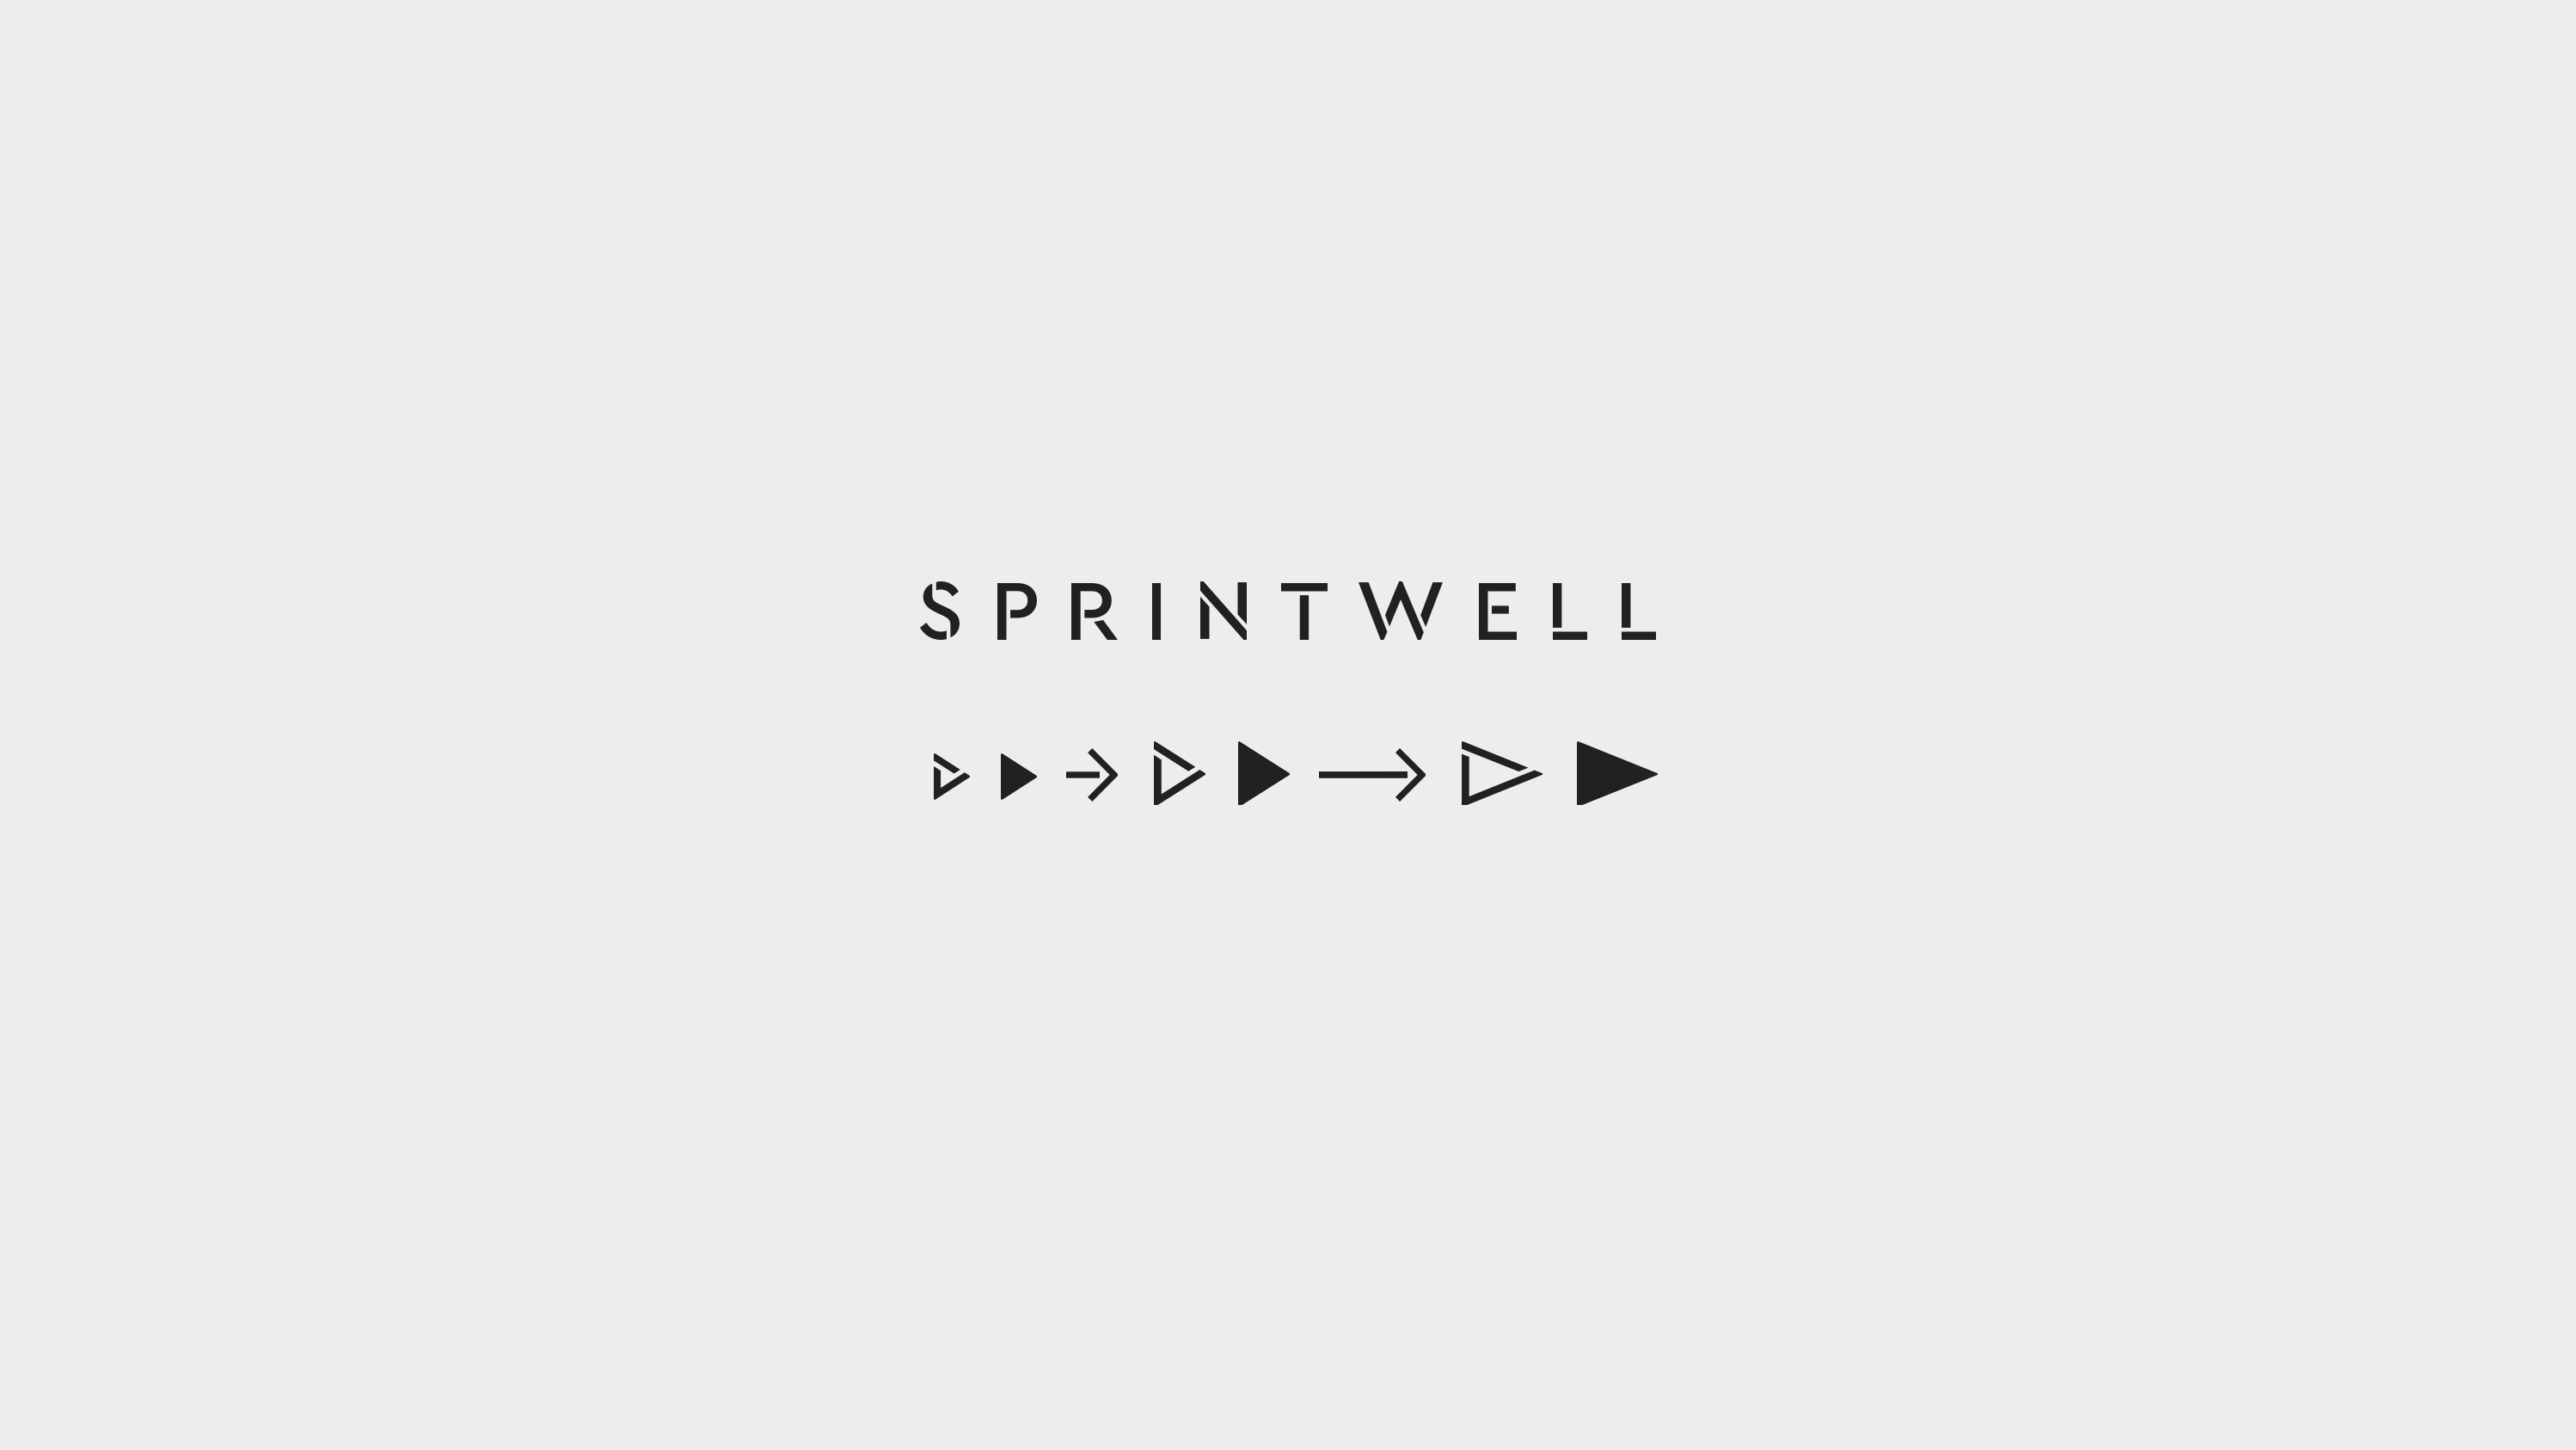 “Sprintwell” sits atop iconography on a grey background.